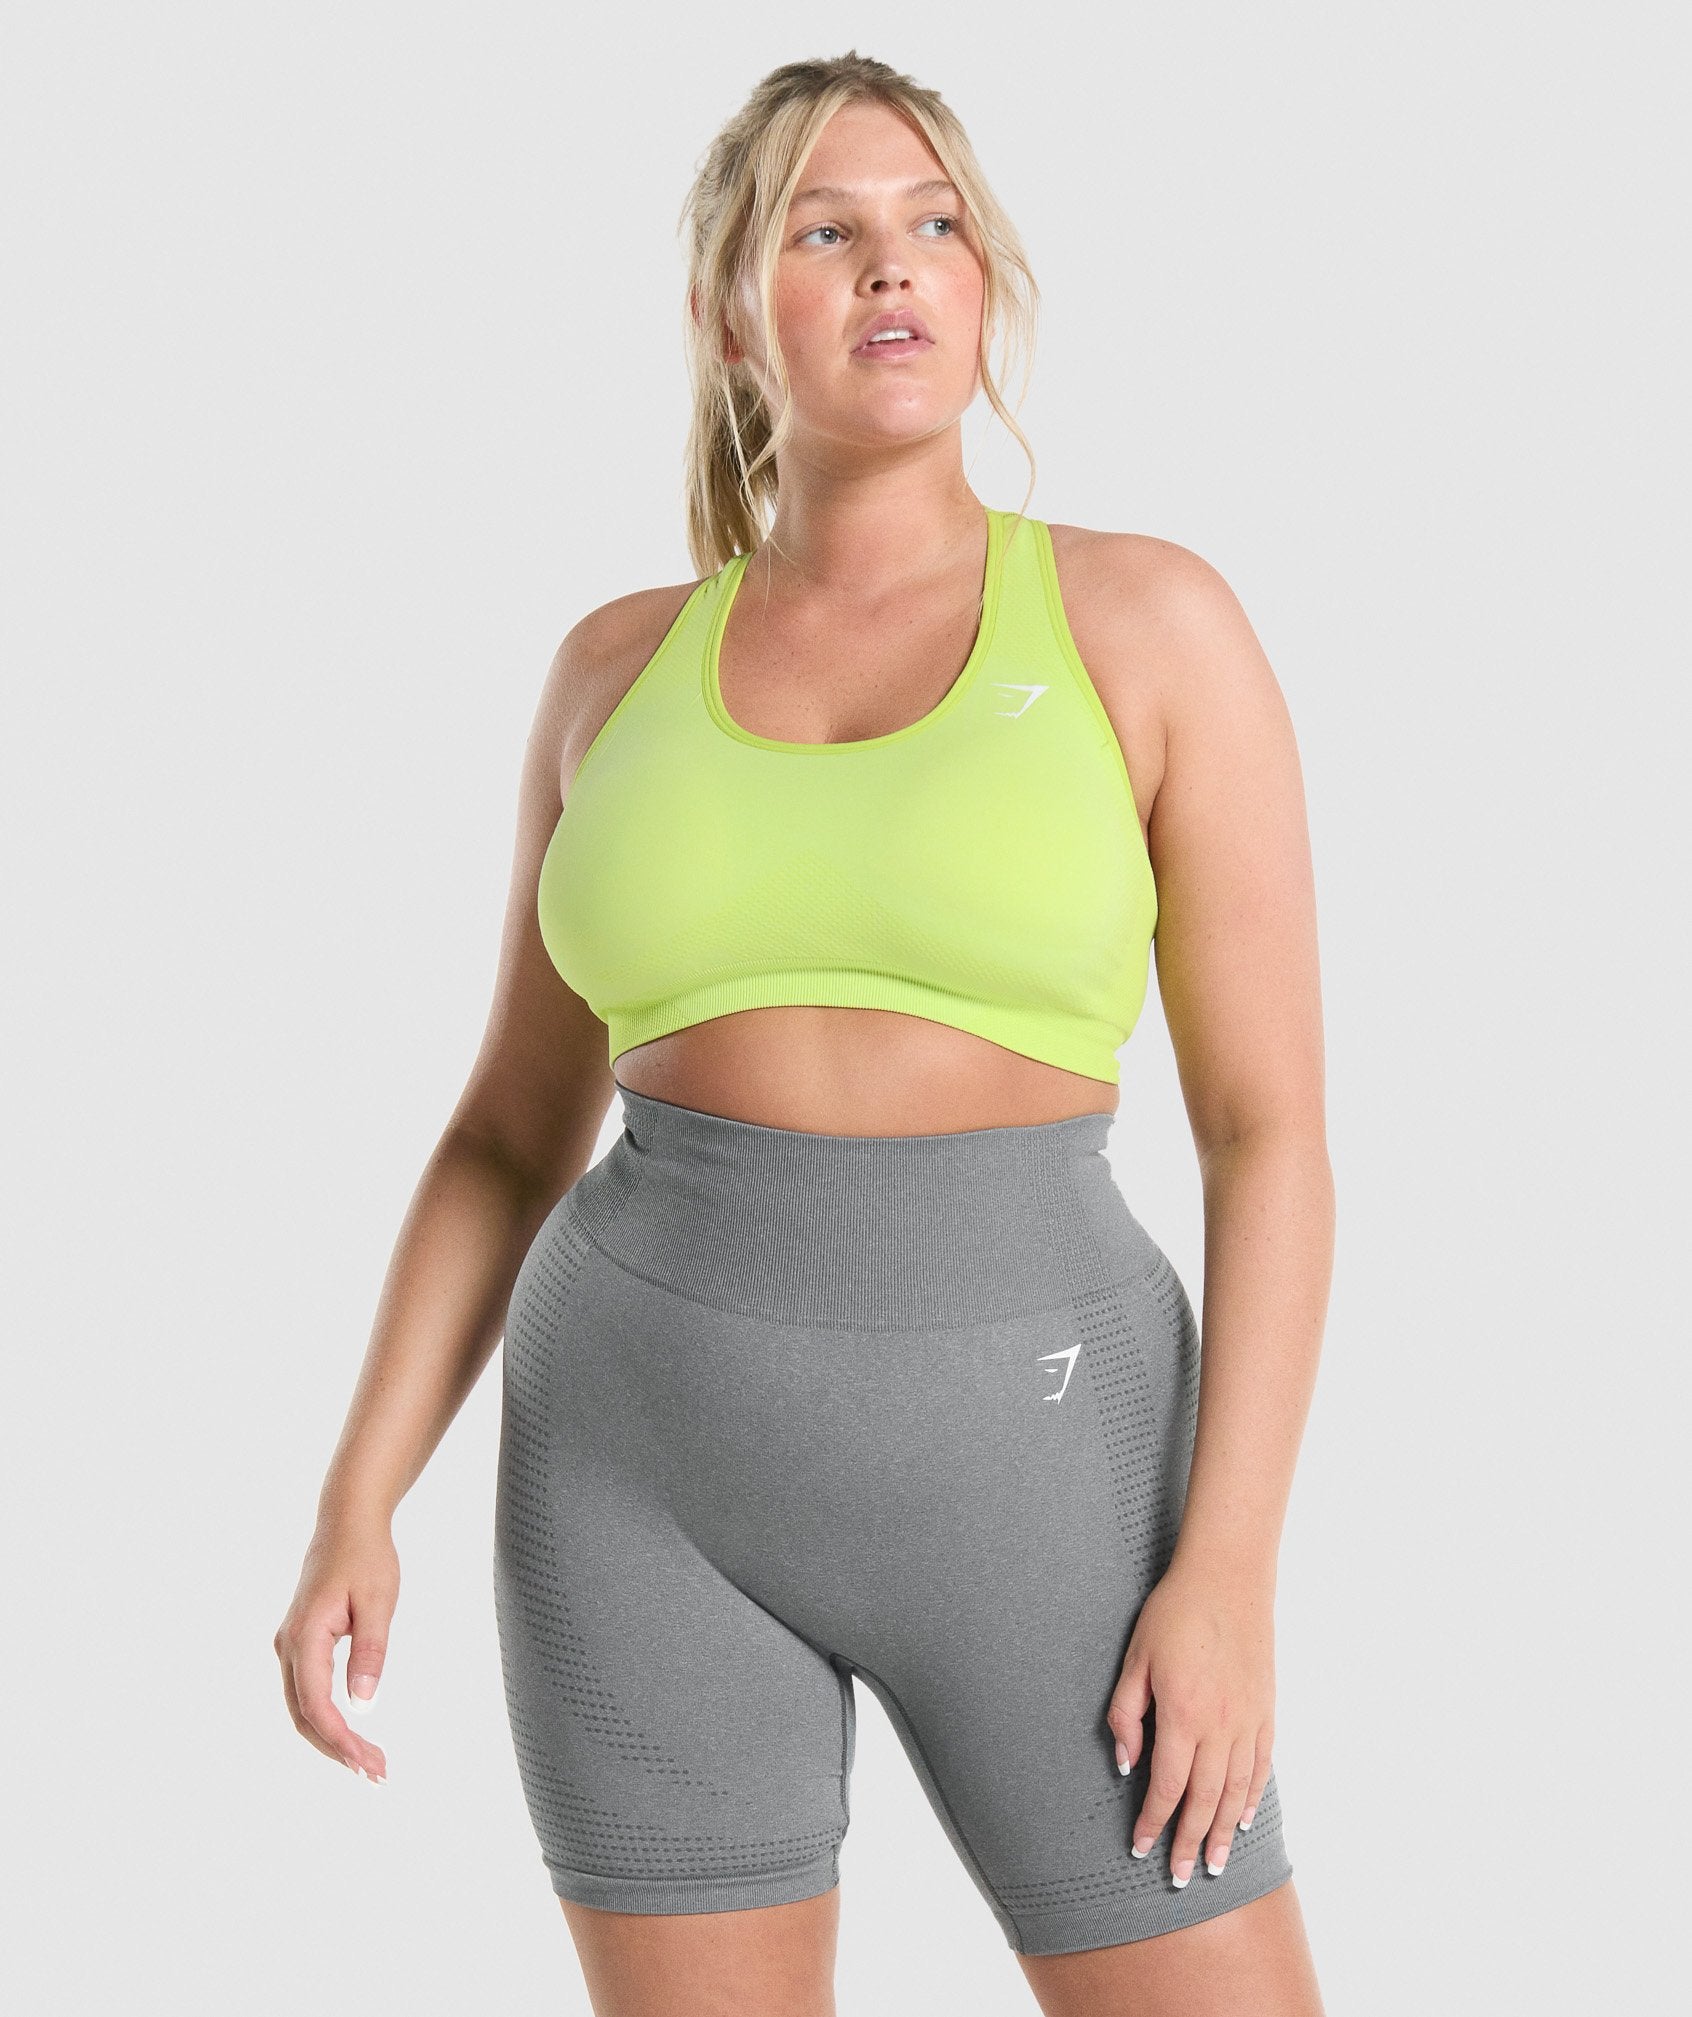 Gymshark Legacy Sports Bra Yellow Size XS - $42 New With Tags - From Sun